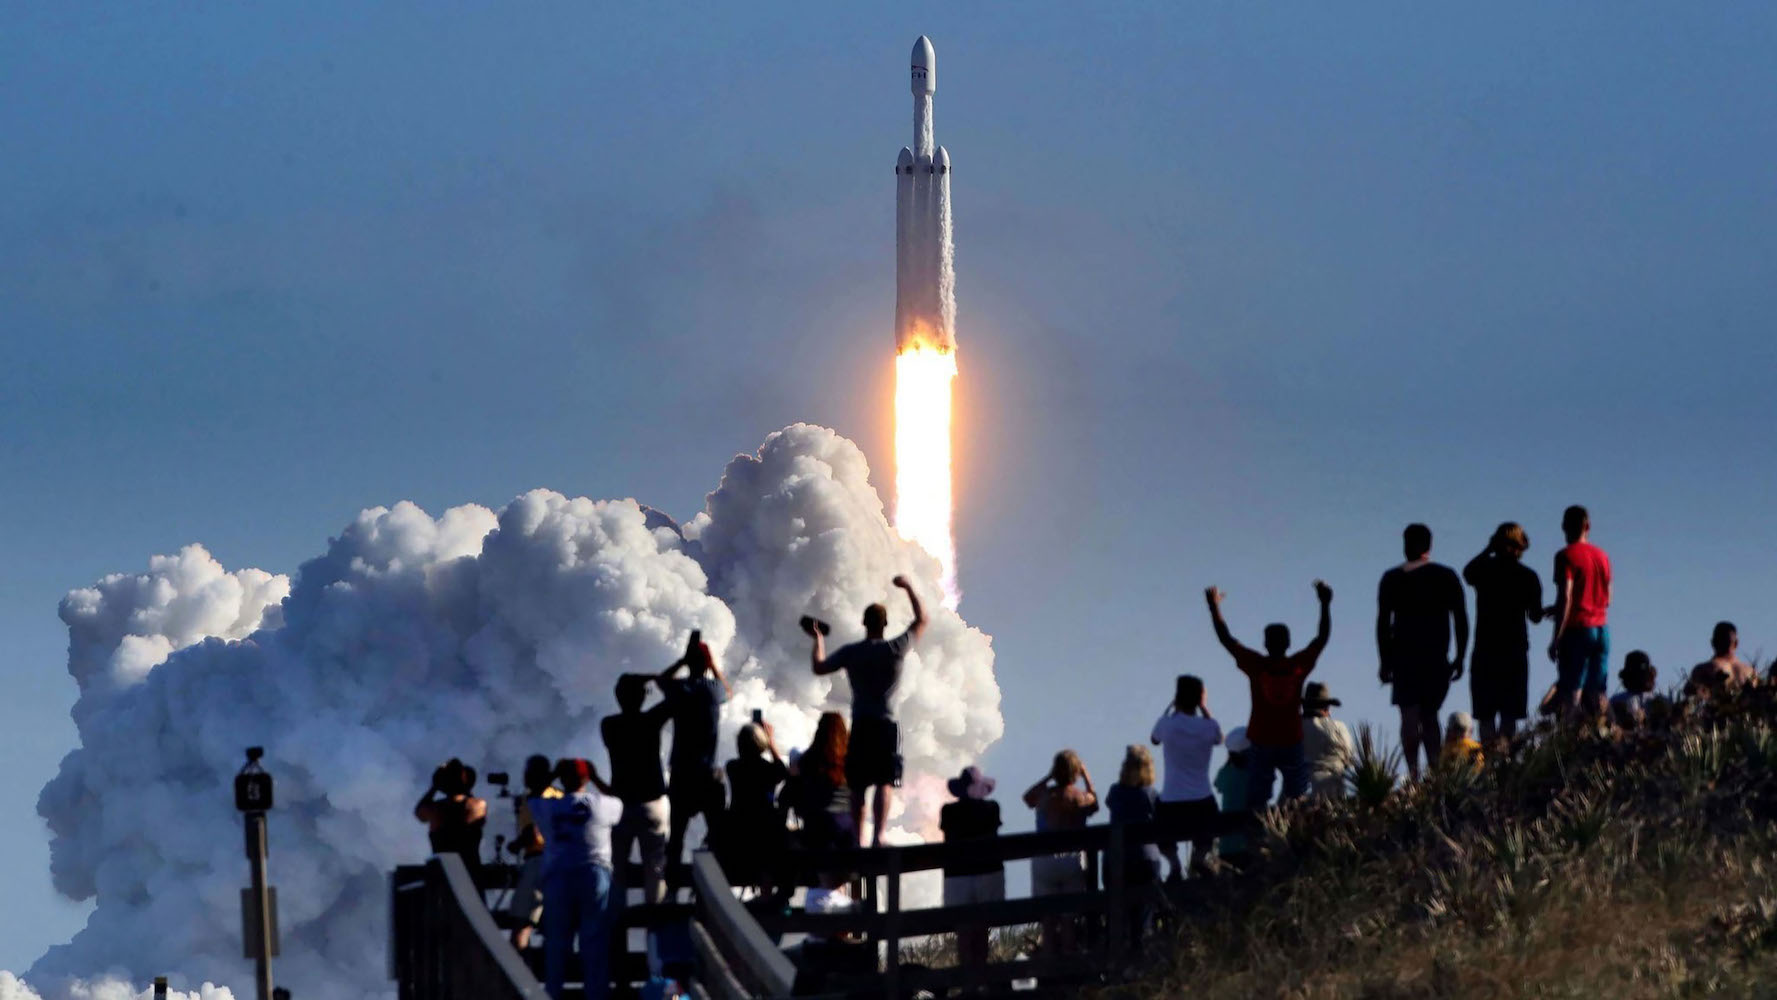 The crowd cheers at Playalinda Beach in the Canaveral National Seashore, just north of the Kennedy Space Center, during the launch of the SpaceX Falcon Heavy rocket on Feb. 6, 2018. Playalinda is one of the closest public viewing spots to see the launch, about 3 miles from the SpaceX launch pad 39-A.  (Joe Burbank/Orlando Sentinel/Tribune News Service via Getty Images)